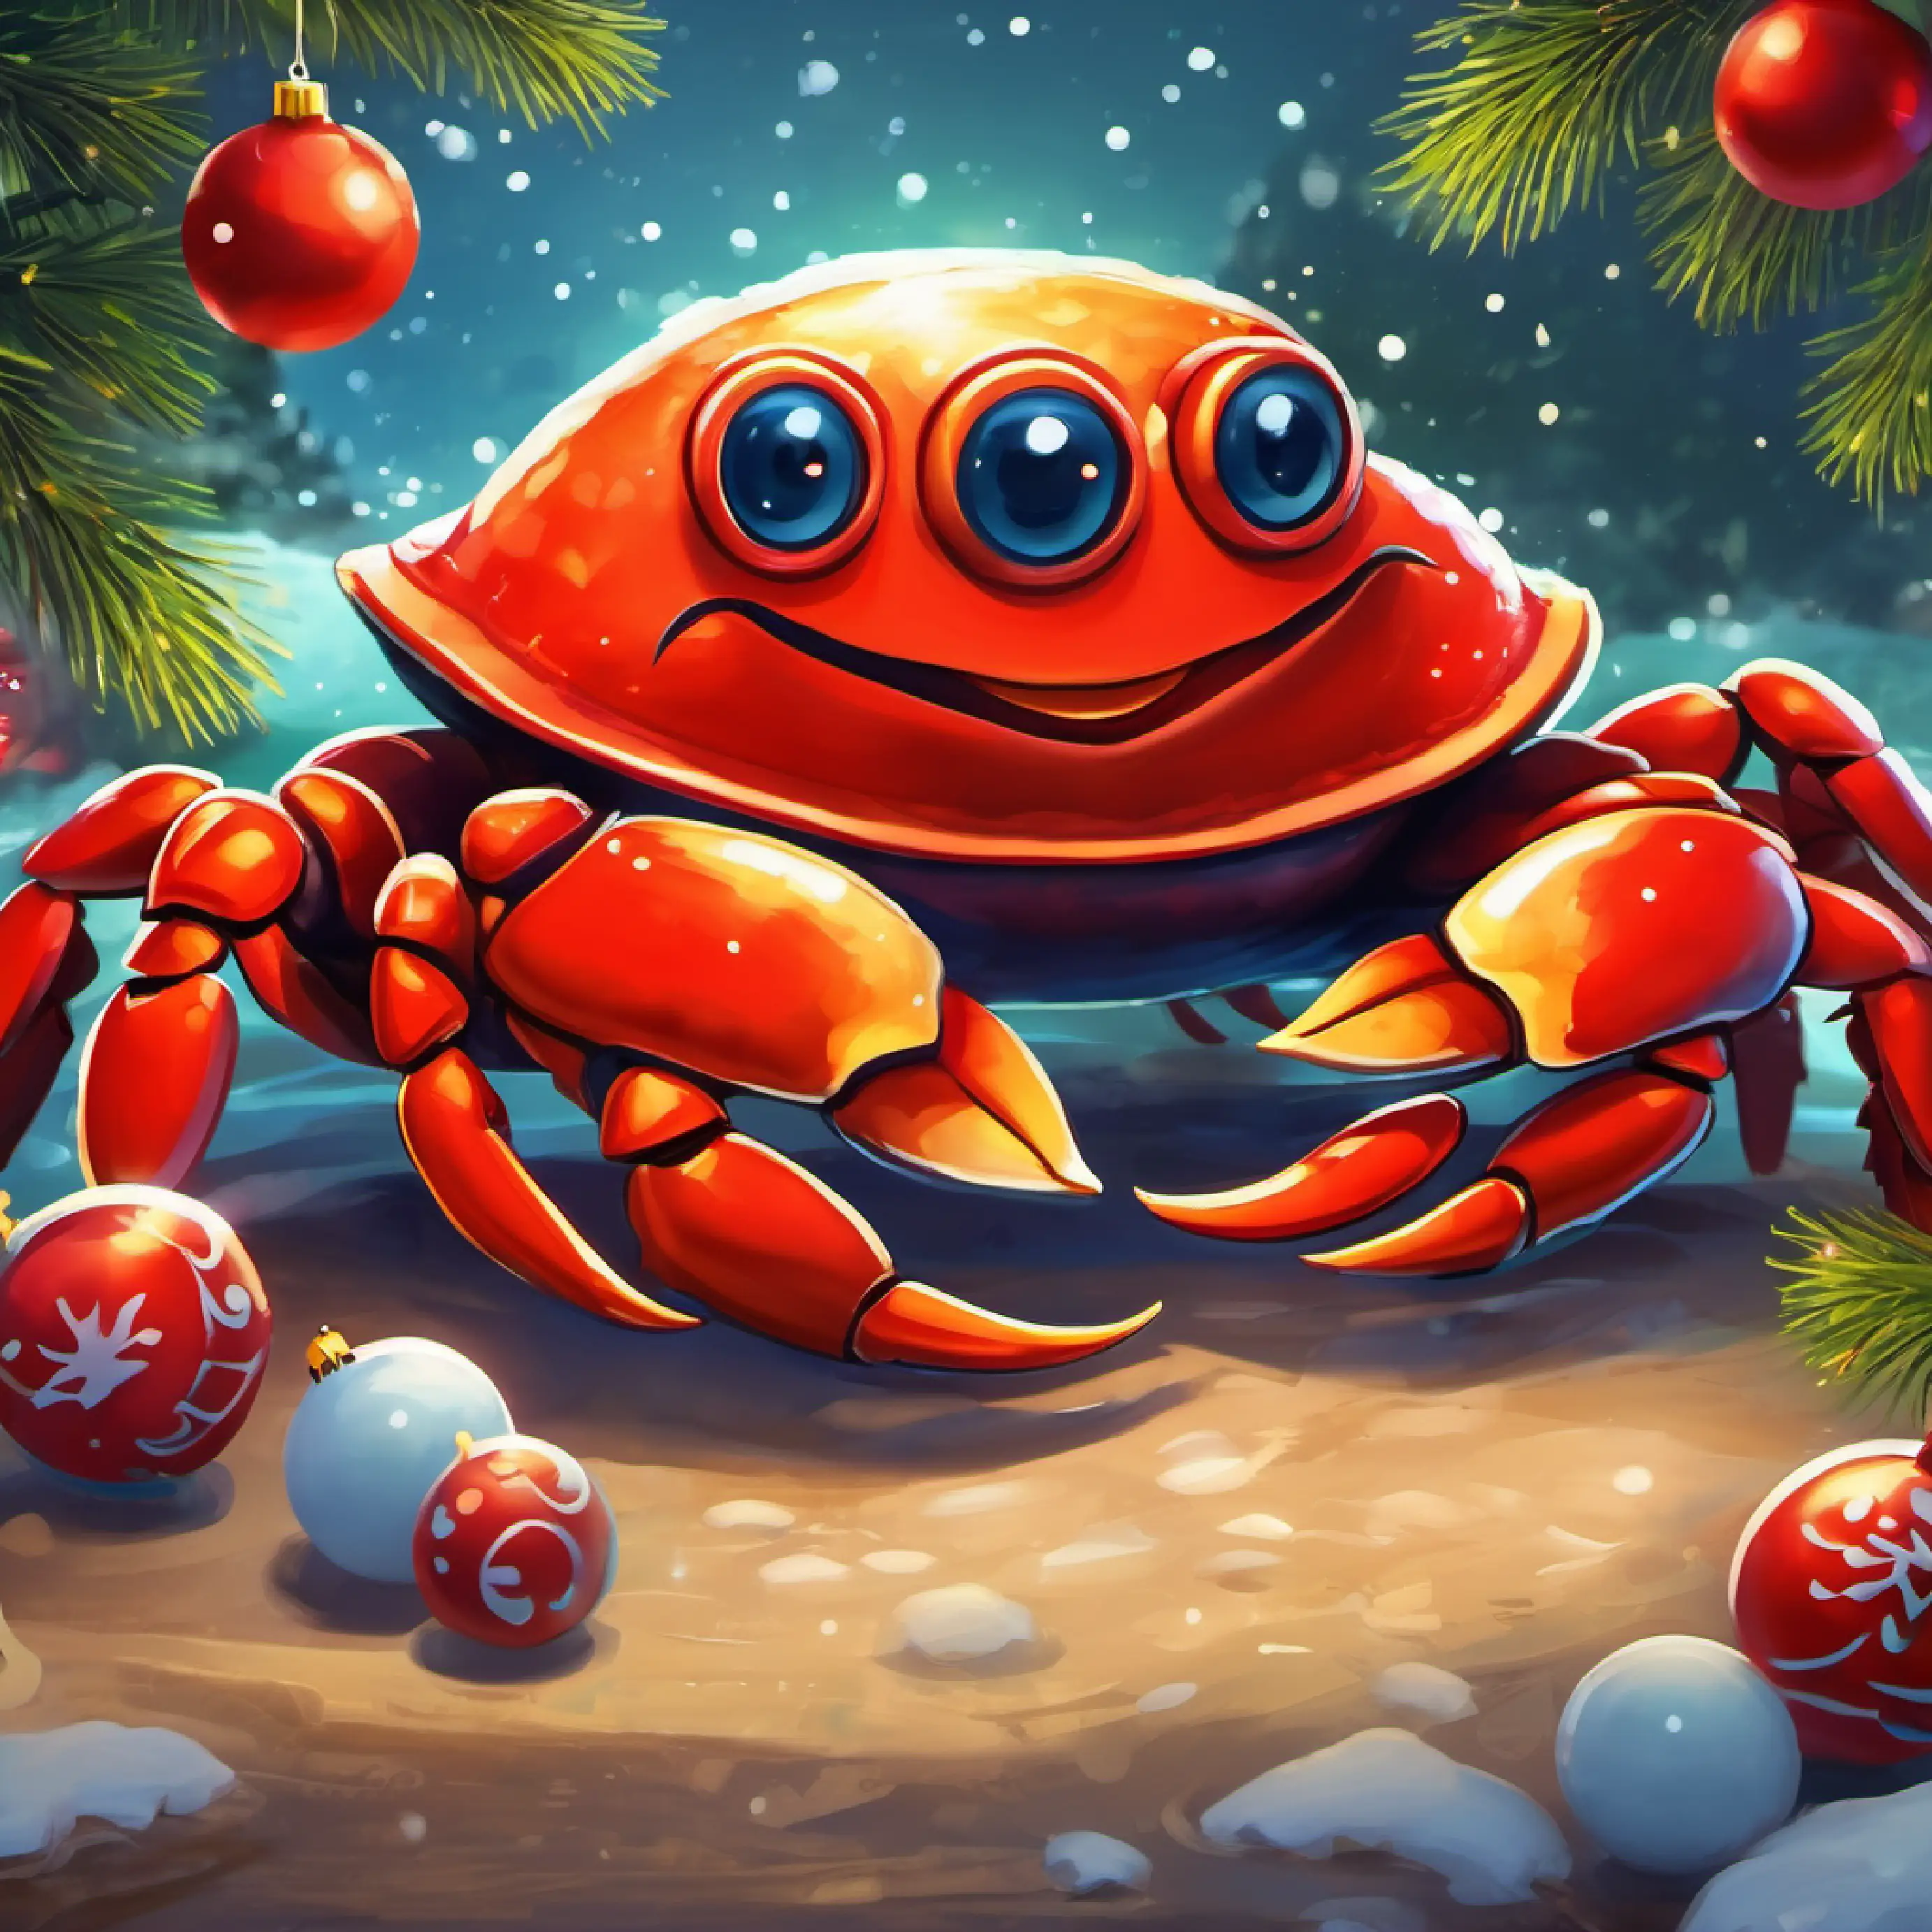 The crab sees his positive qualities and smiles.